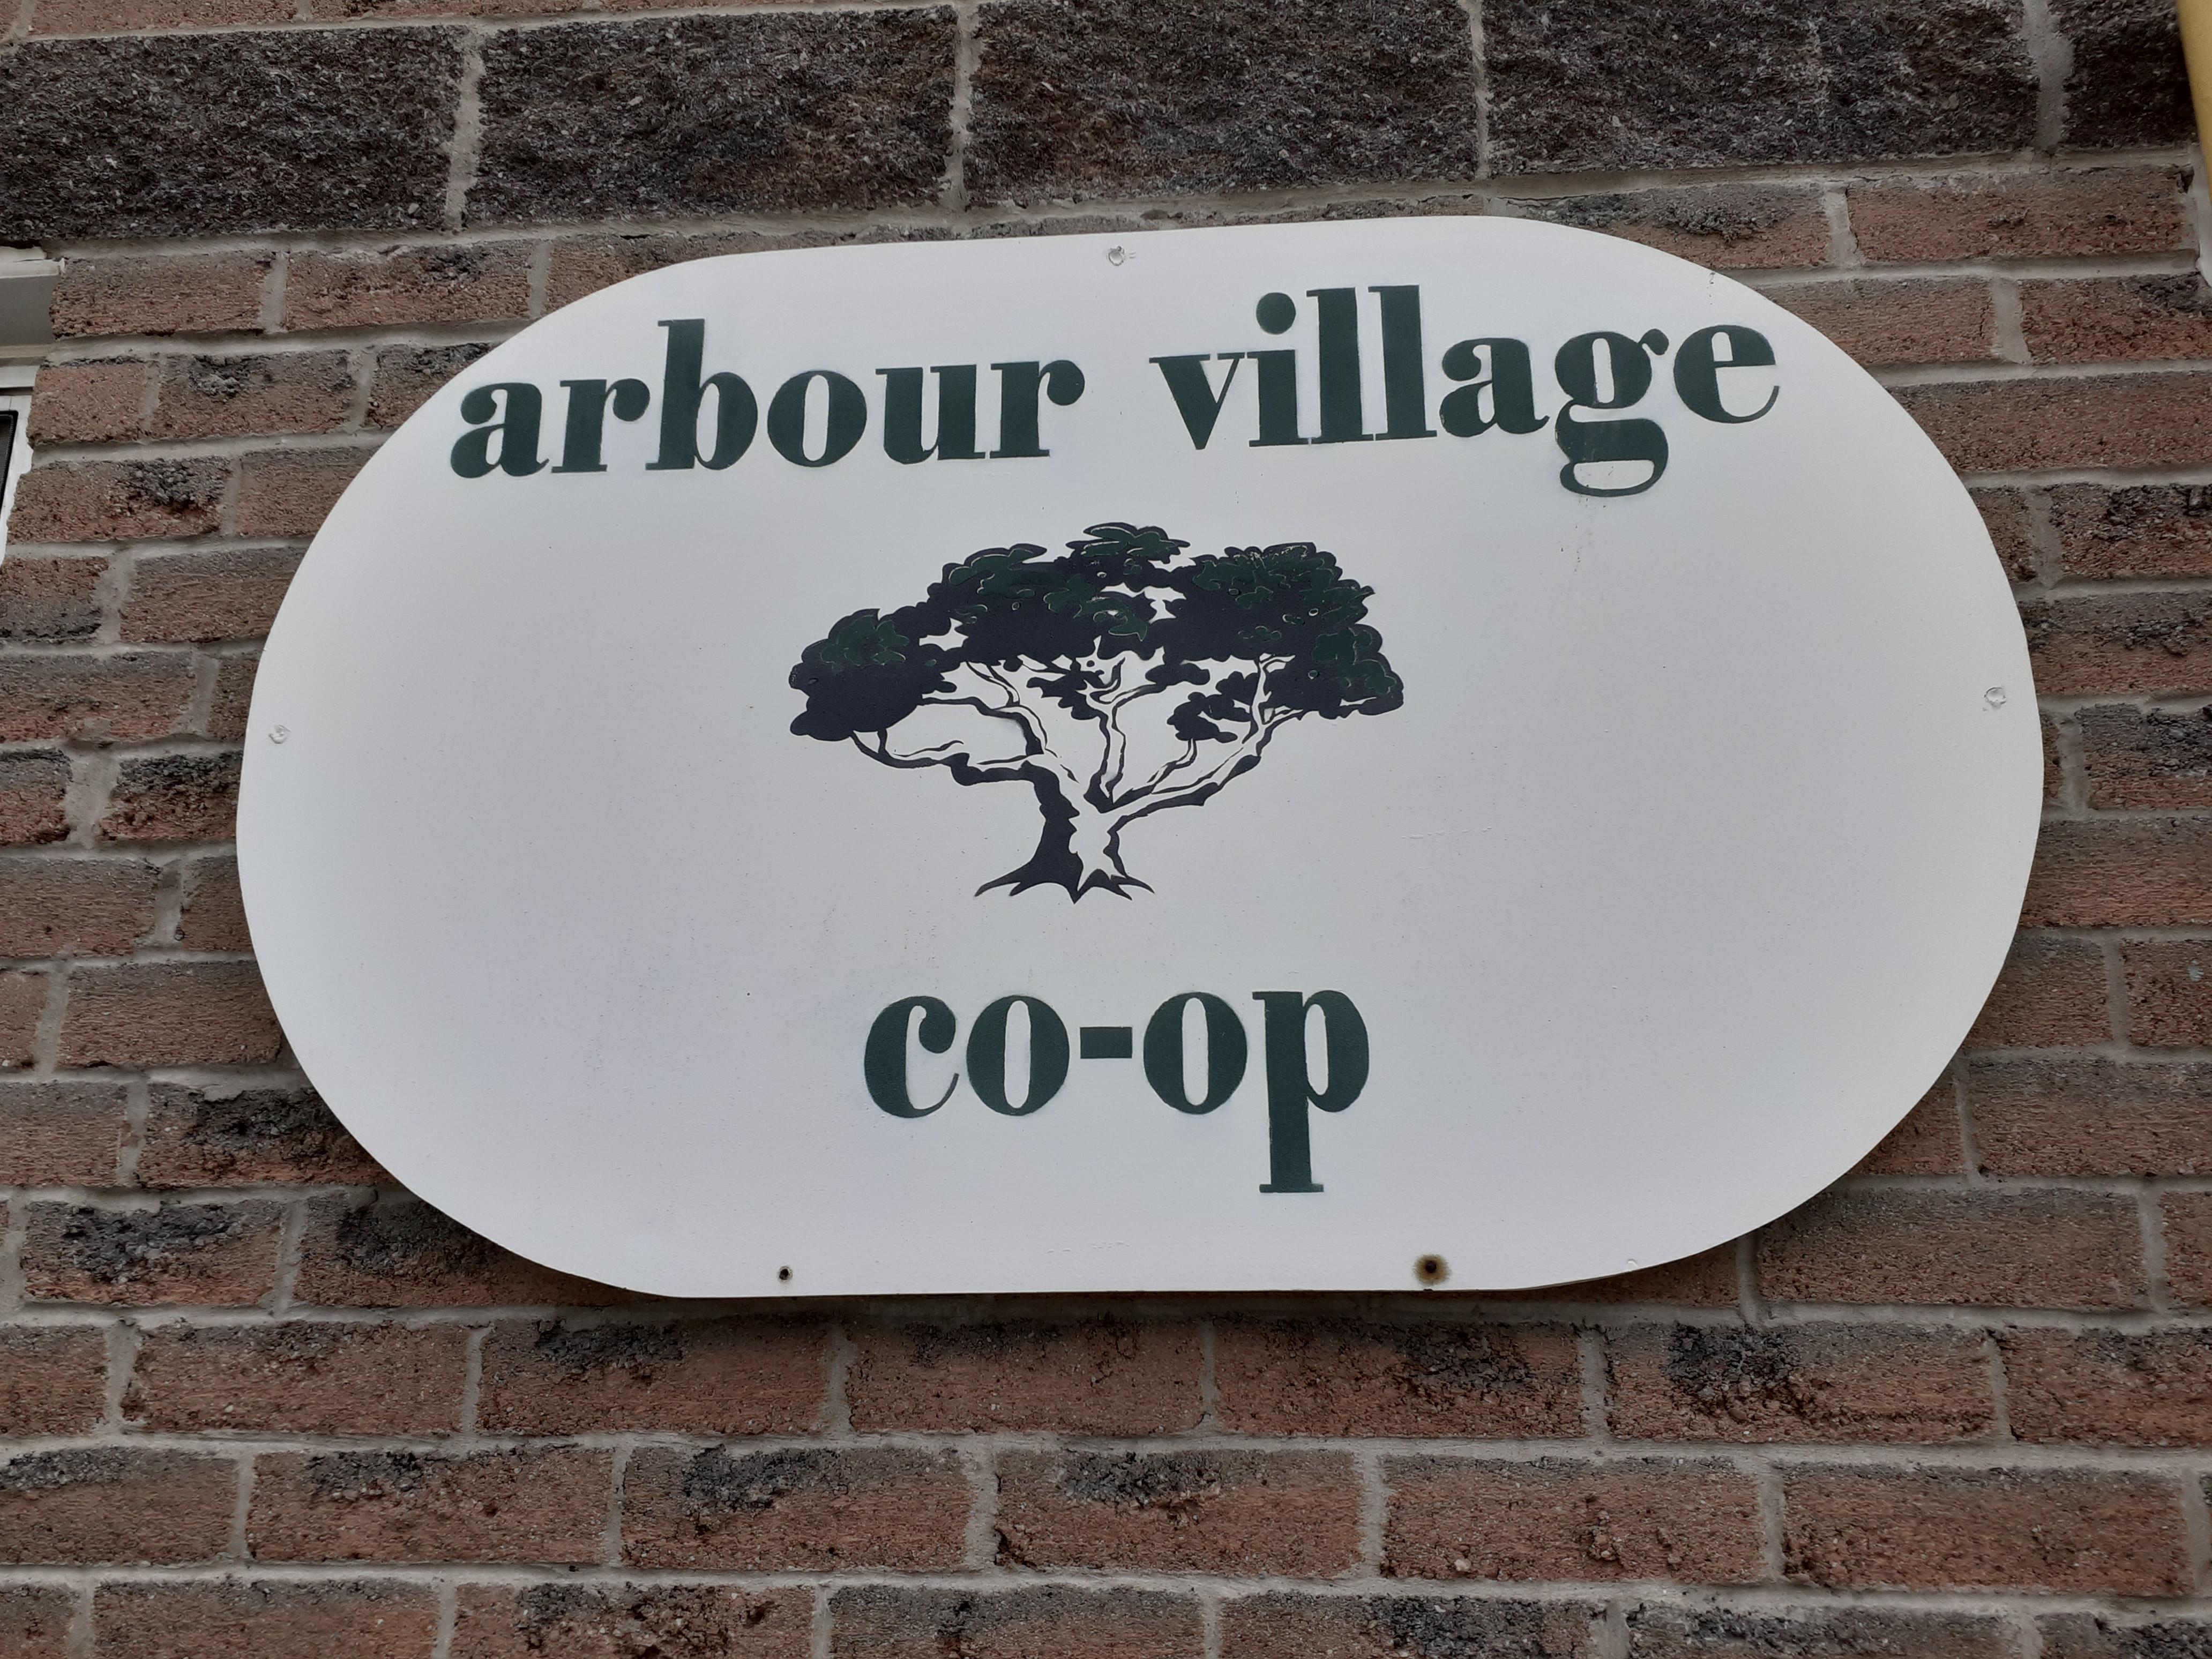 Arbour Village Coop written on a sign with an image of a tree on a brick wall w